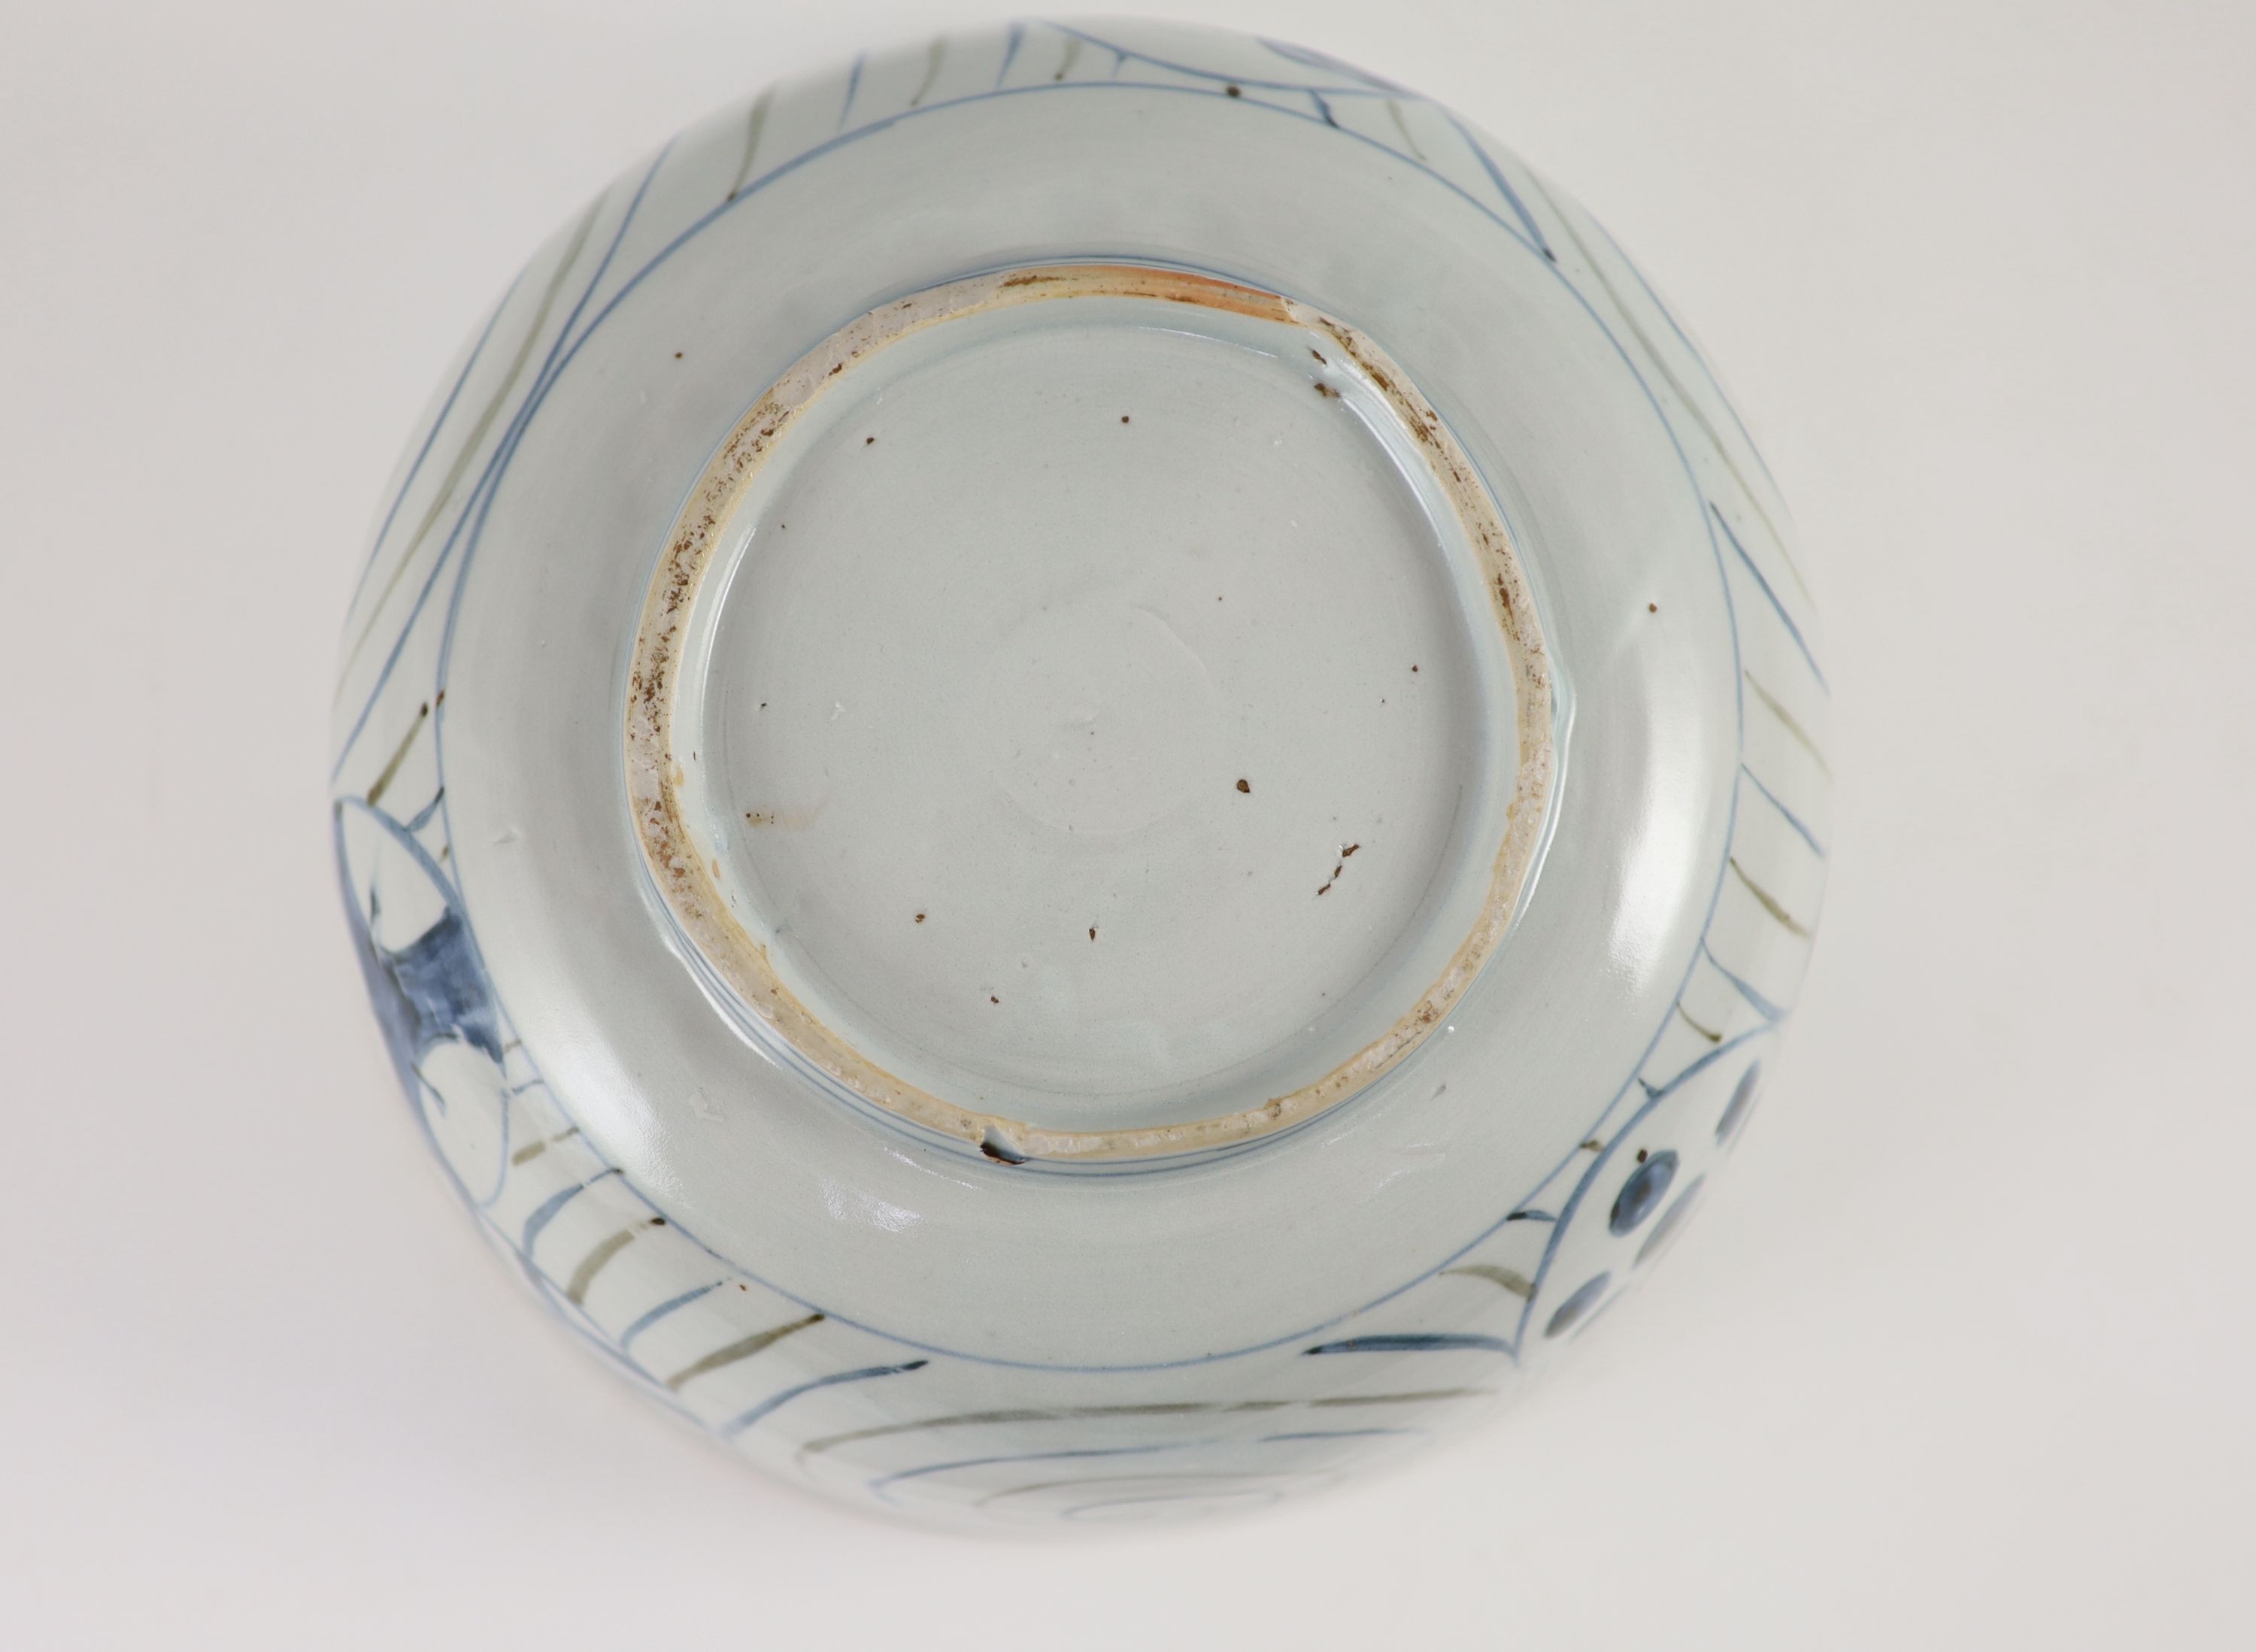 An unusual underglaze blue and iron brown bowl, probably Korean, Joseon dynasty, 18th/19th century, 23cm diameter, lacking its cover, cracked